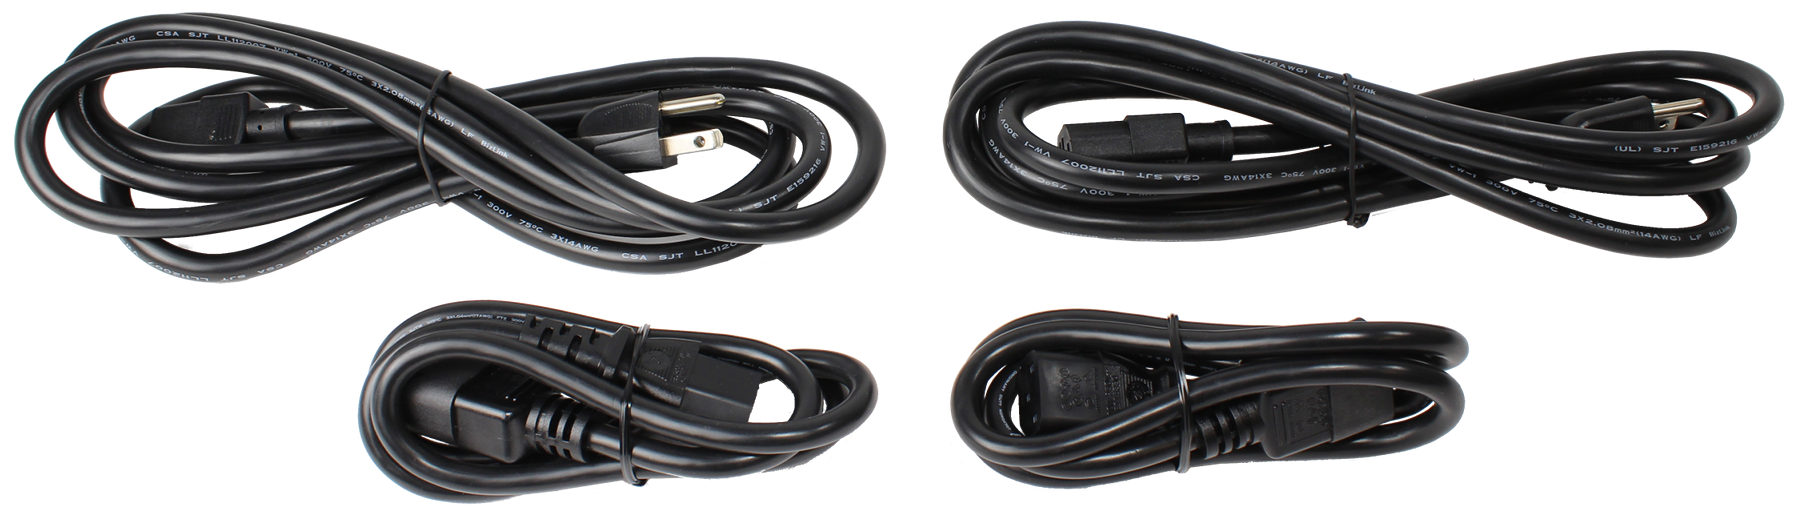 _images/tn_es60_powercords.png